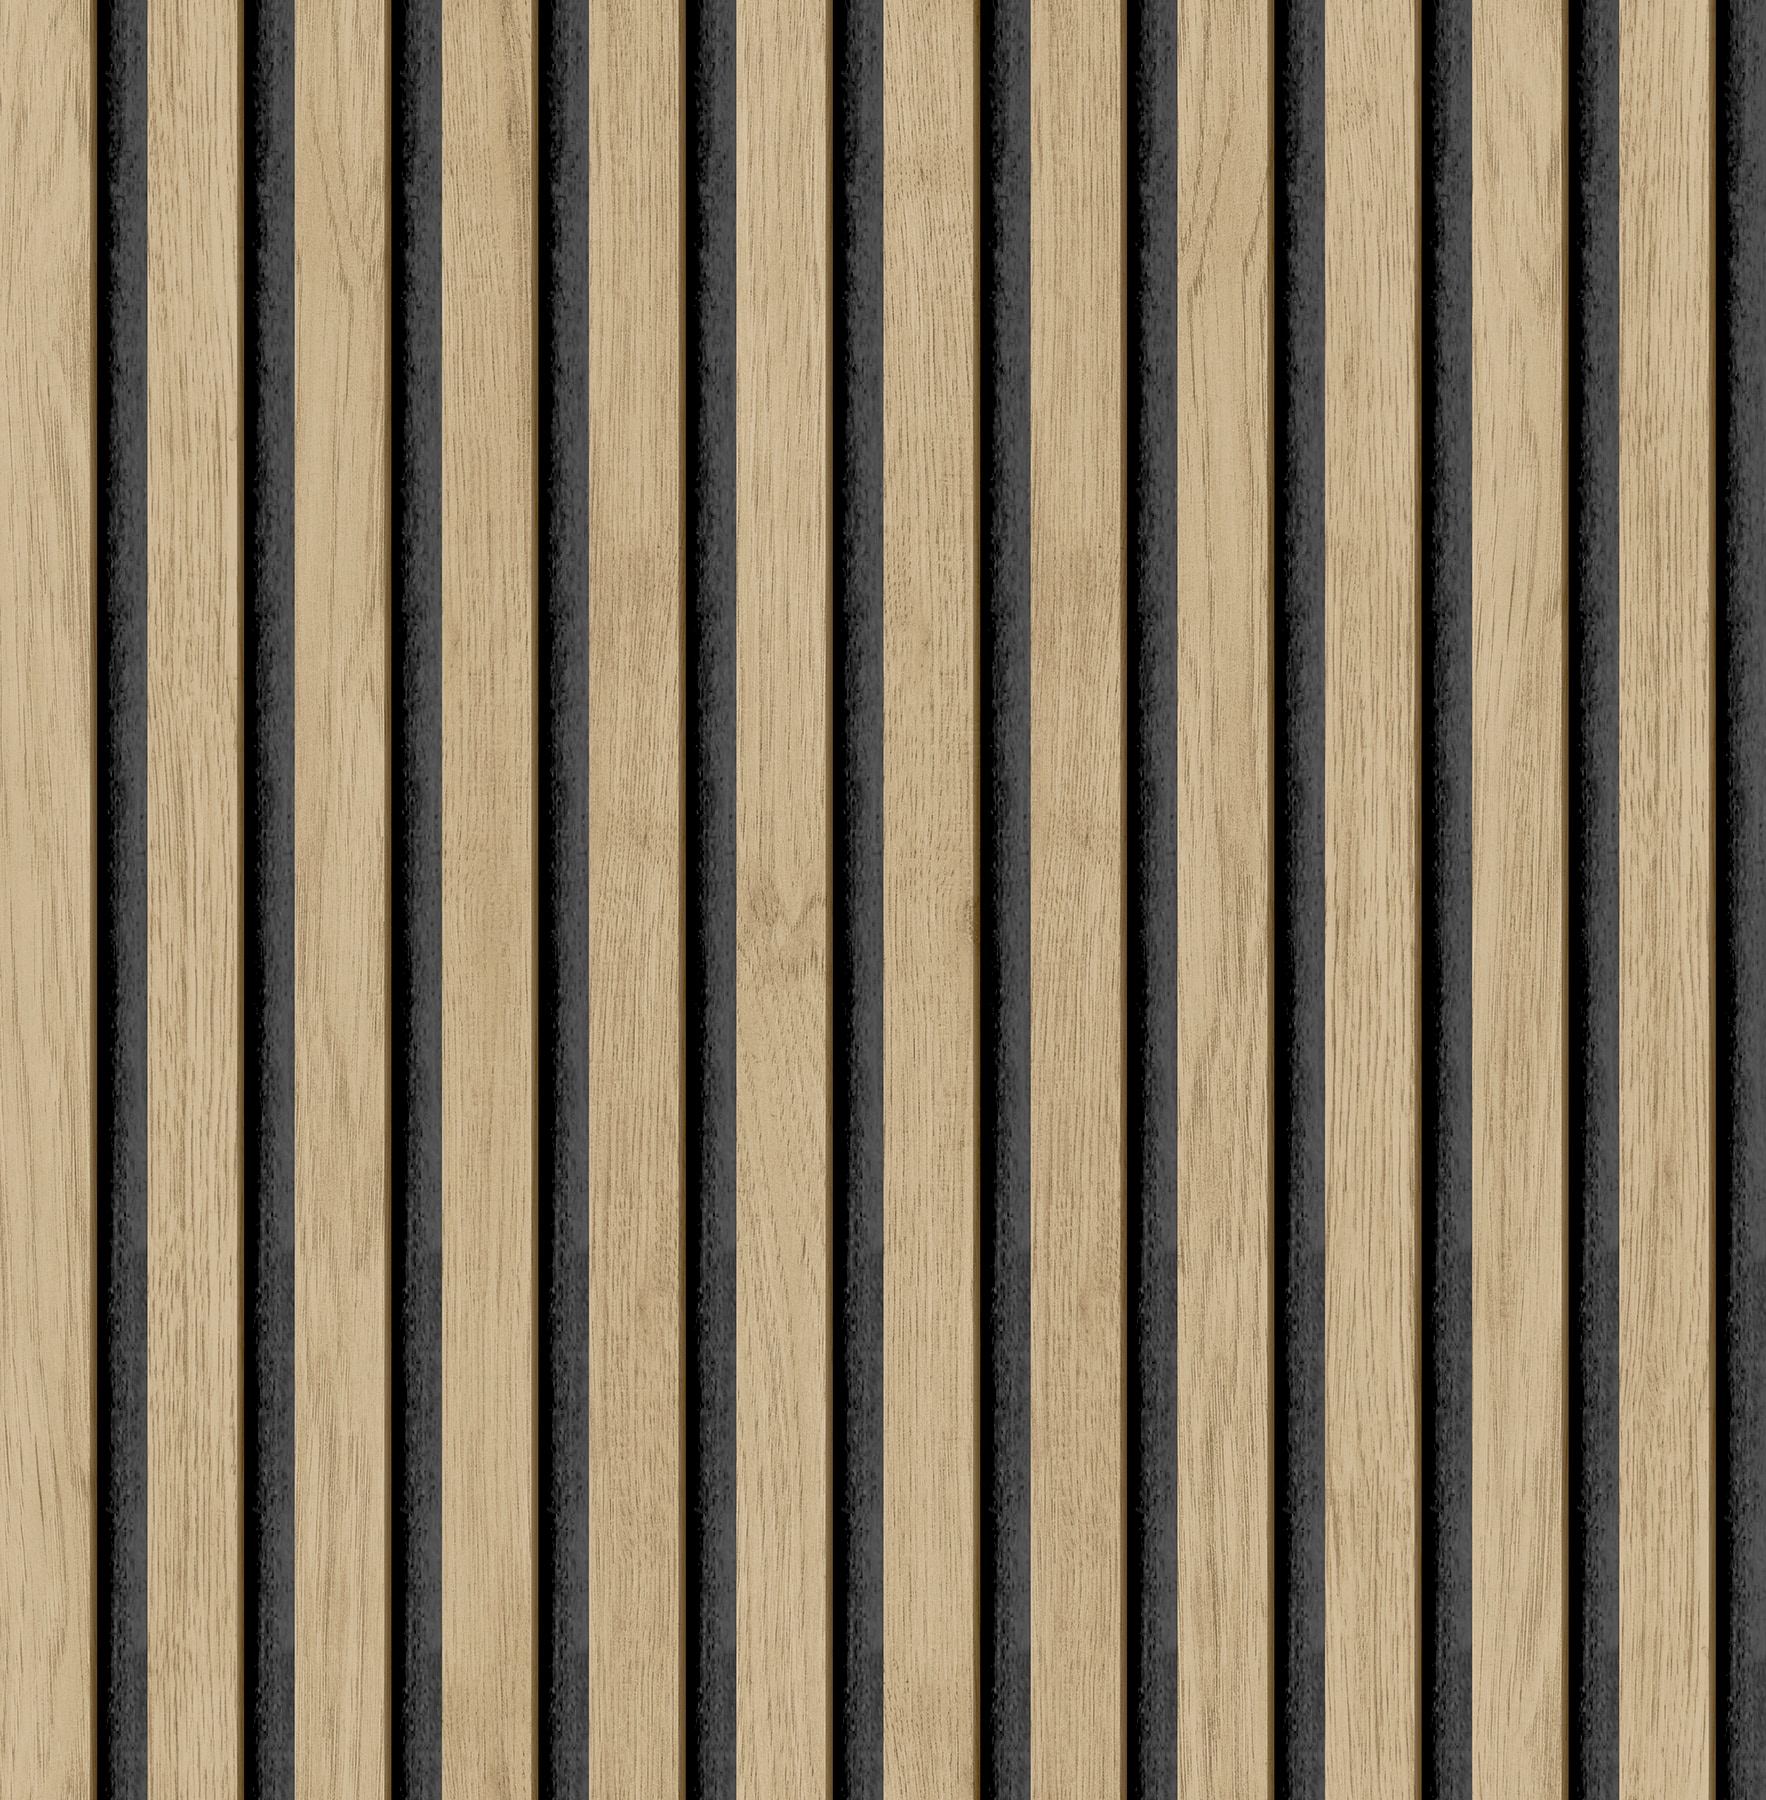 Tempaper Neutral Grasscloth Vinyl Peel and Stick Removable Wallpaper 28  sq ft GR15032  The Home Depot